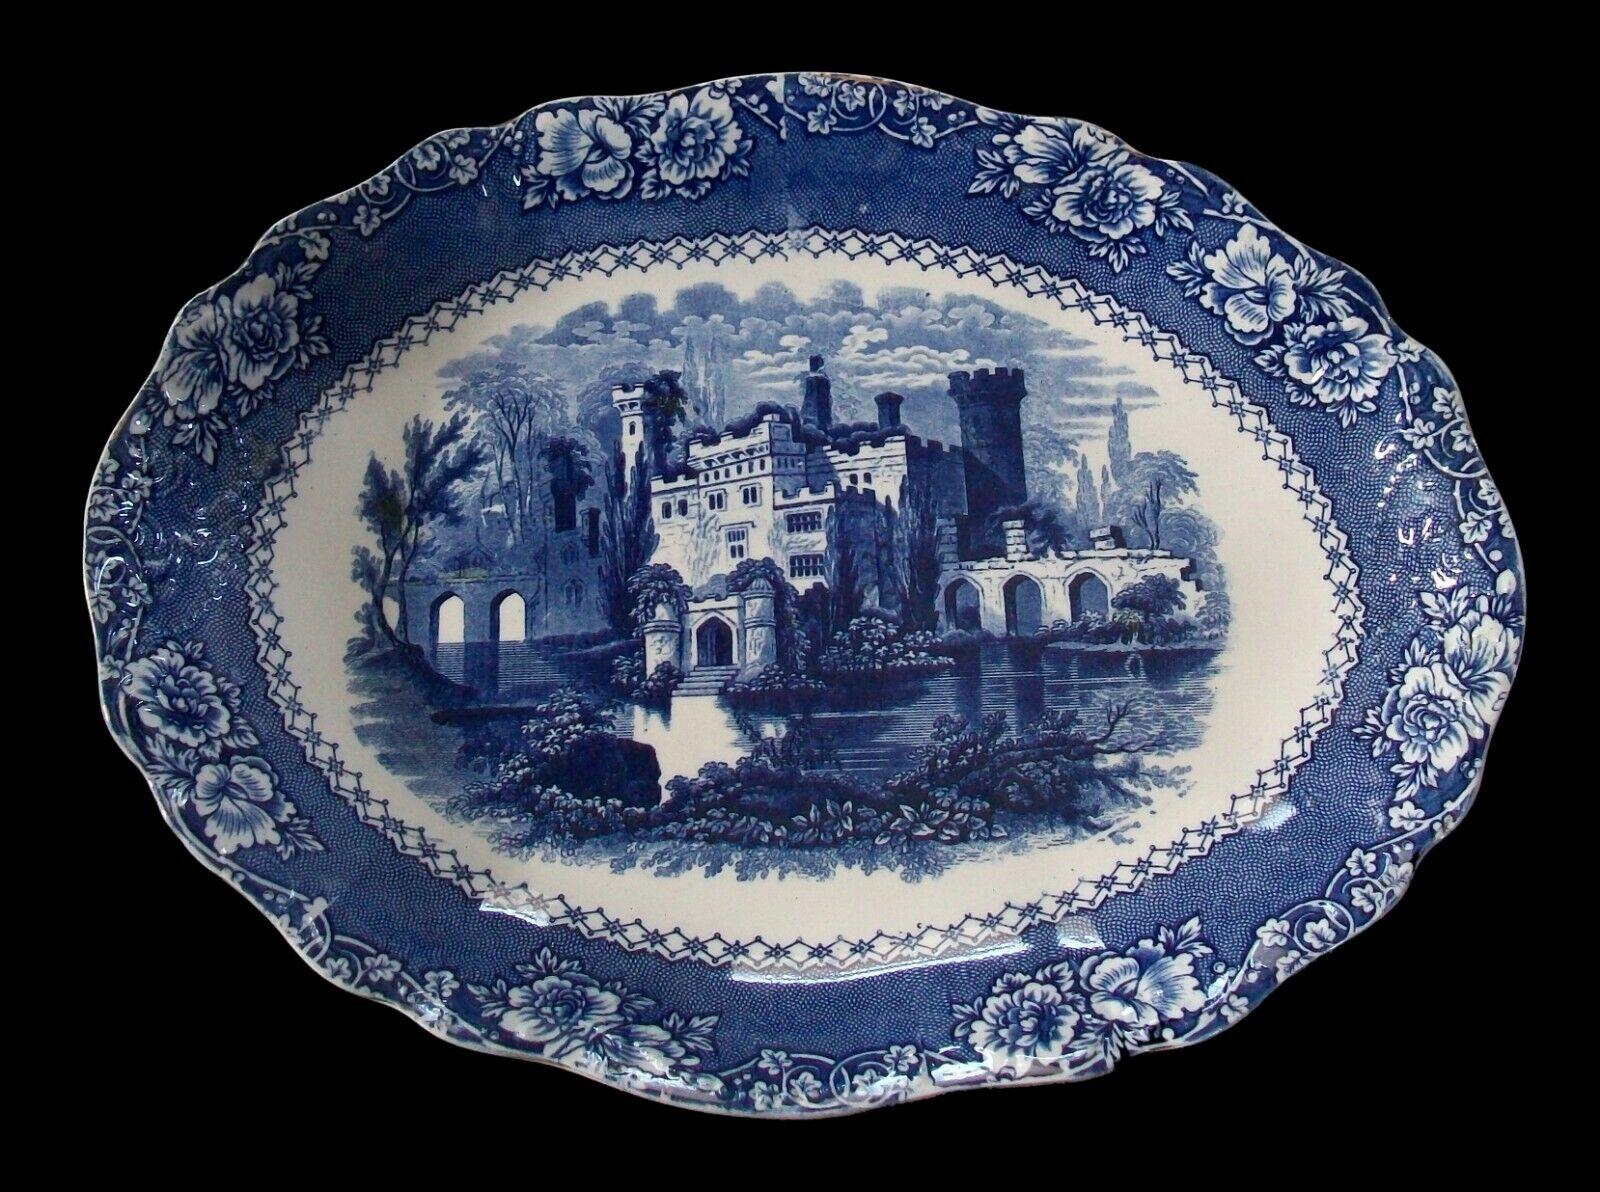 ALHAMBRA (Pattern Name) - Victorian Staffordshire blue transfer decorated ironstone platter or tray - featuring a castle in the center with a floral pattern border - raised/embossed handle grips to each end - high gloss glaze over-all - pattern name